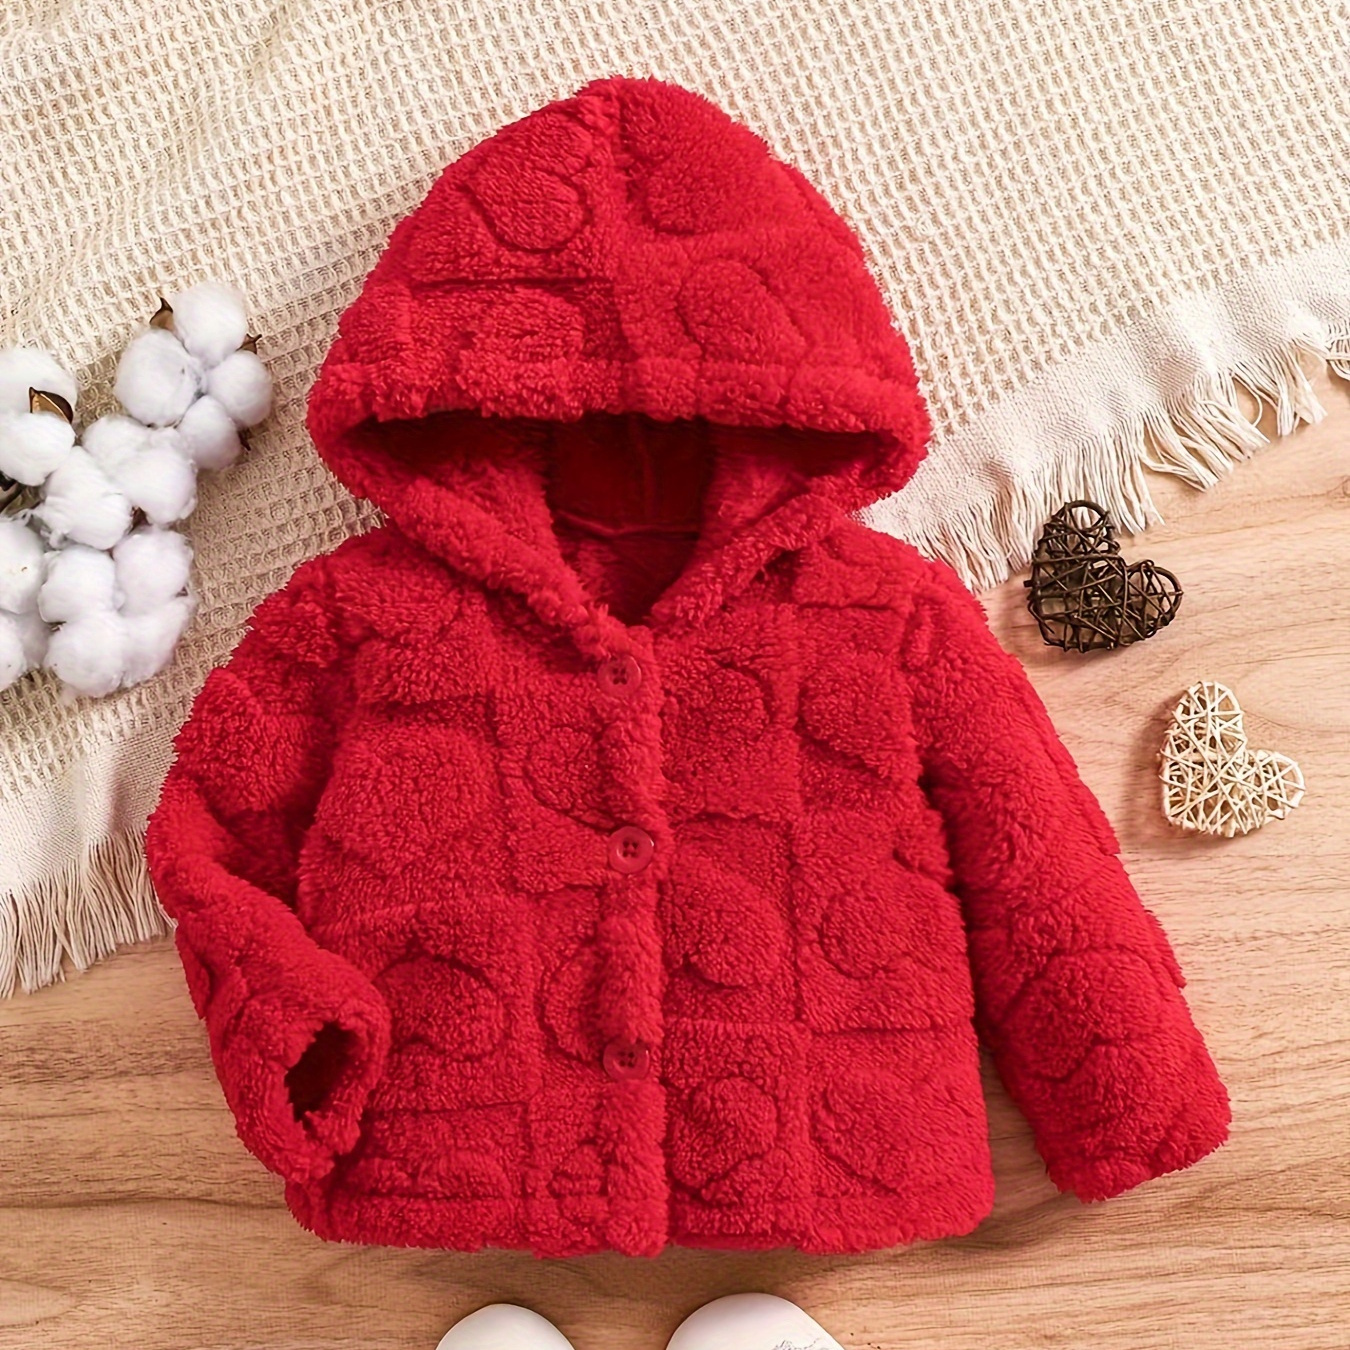 

Baby's Heart Pattern Fleece Hooded Jacket, Casual Button Warm Thickened Coat, Infant & Toddler Girl's Clothing For Winter Fall Outdoor